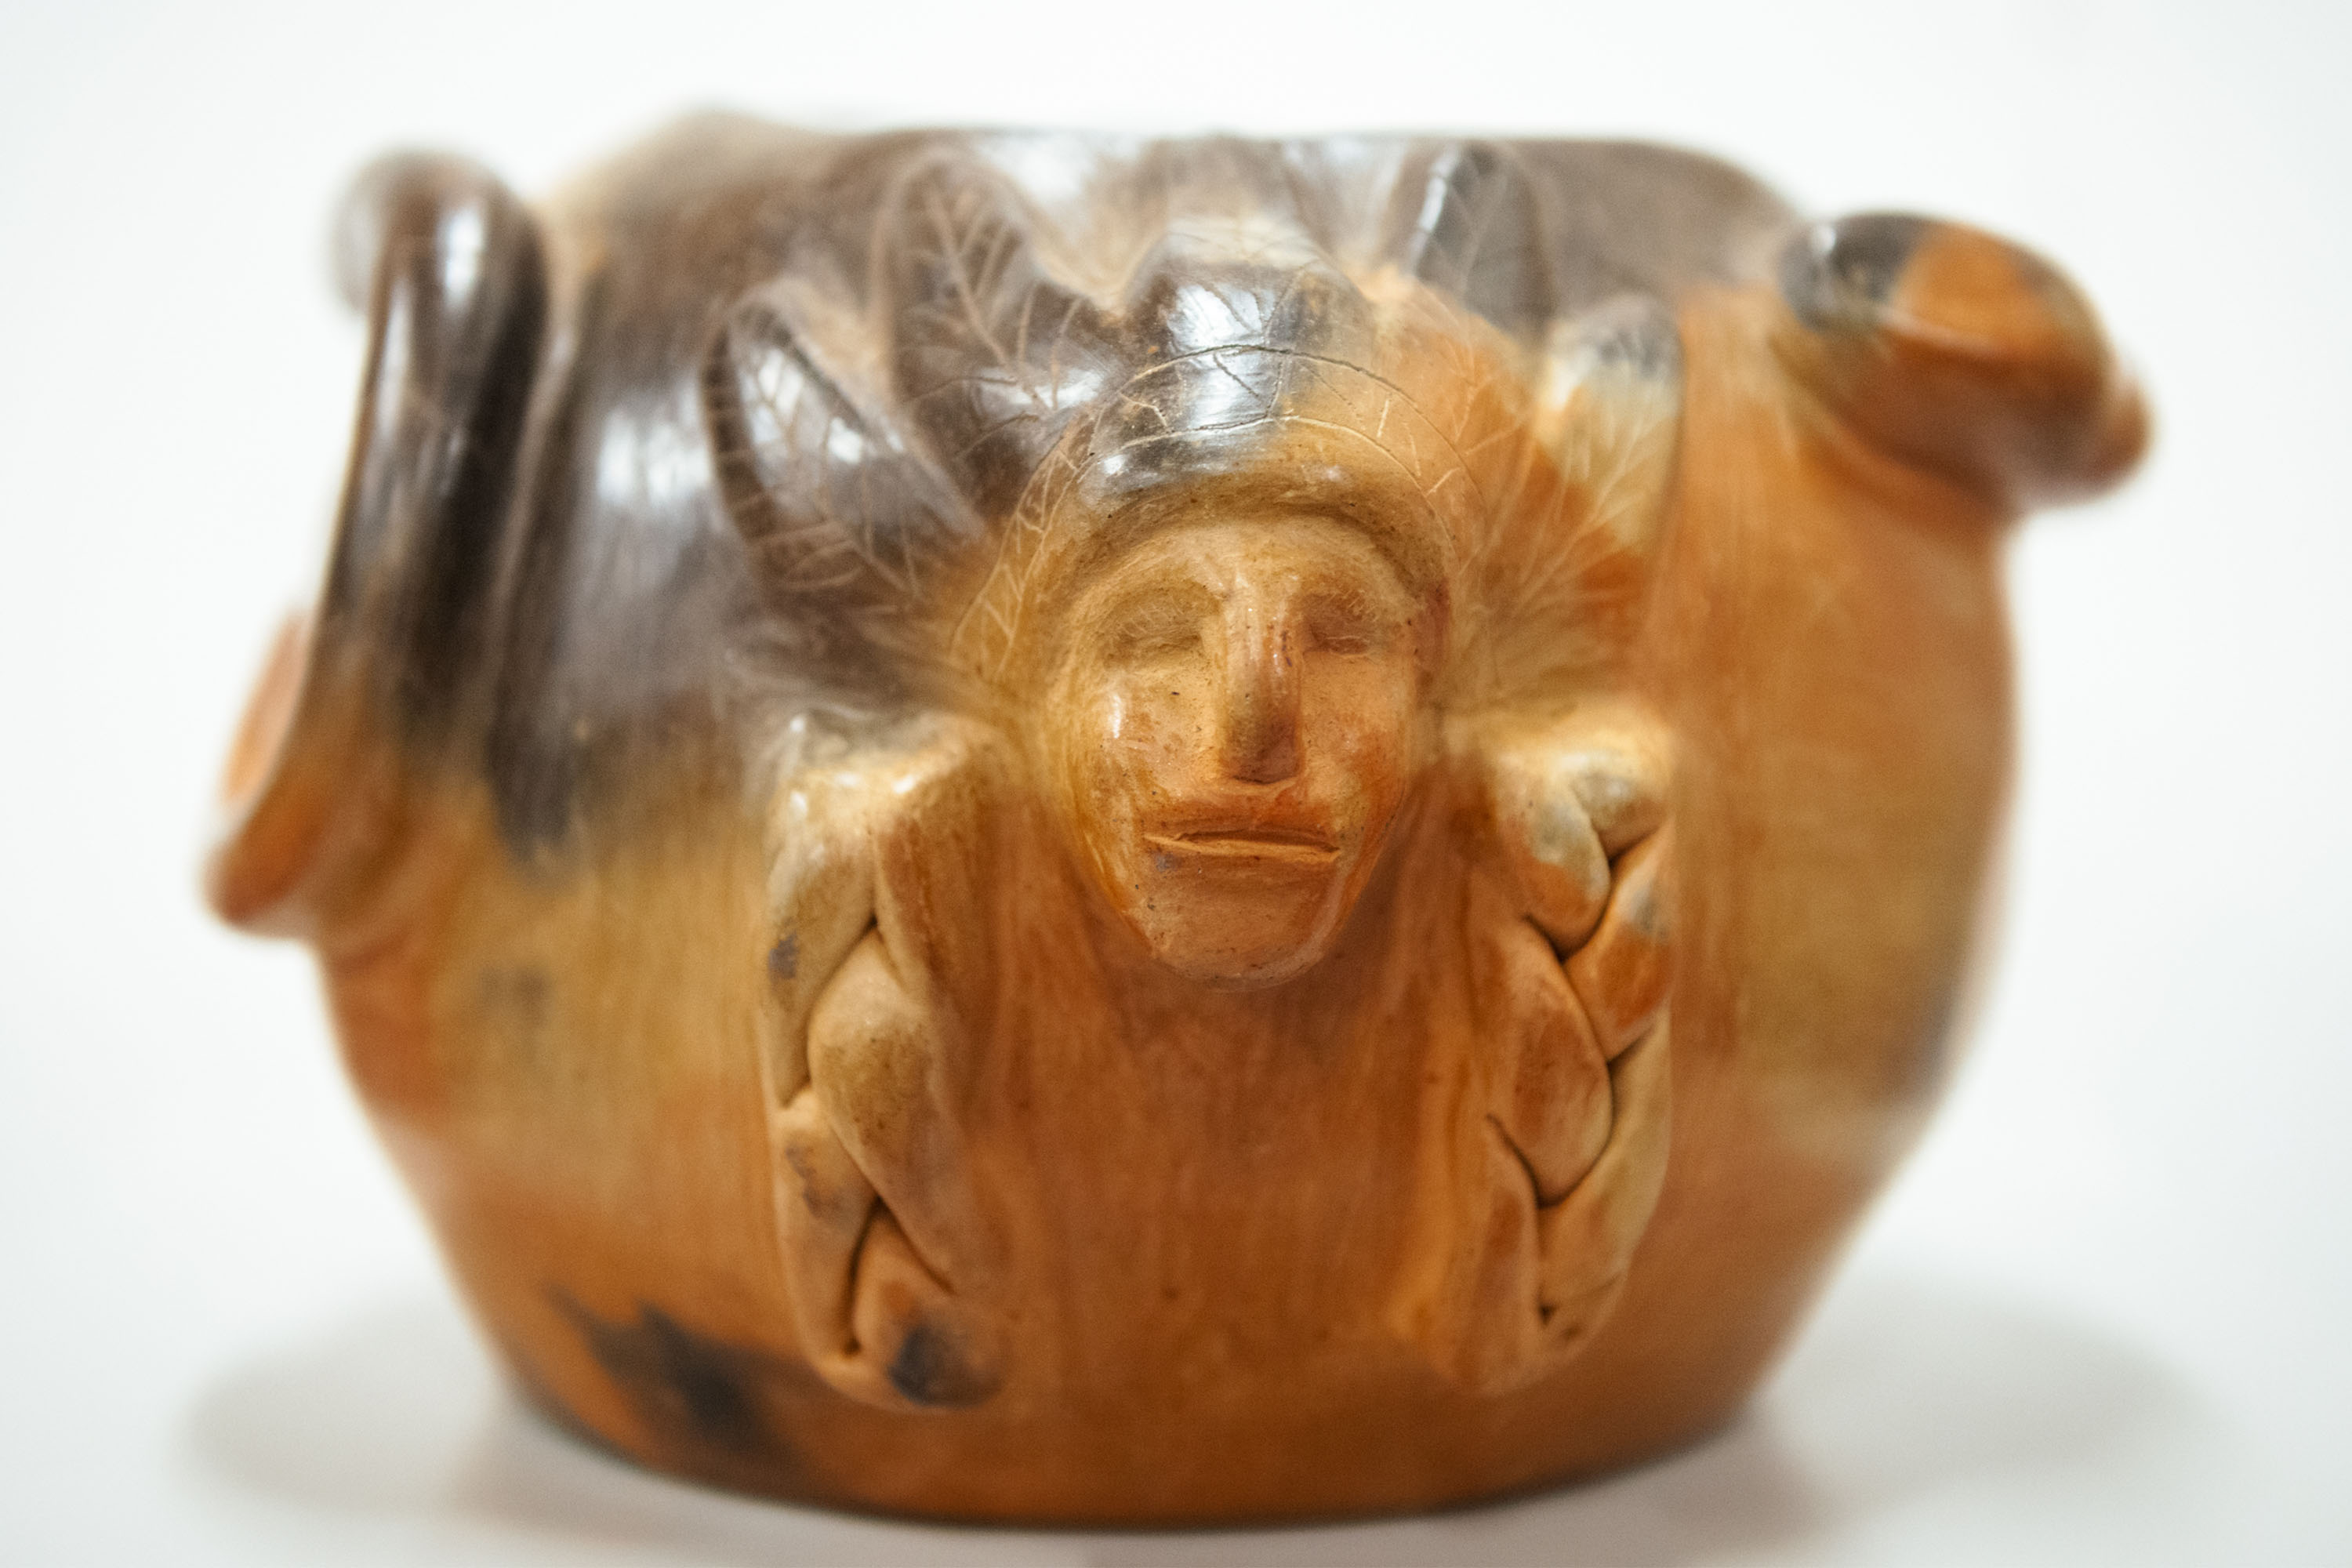 Catawba pottery bowl with image of a chief's head on the side